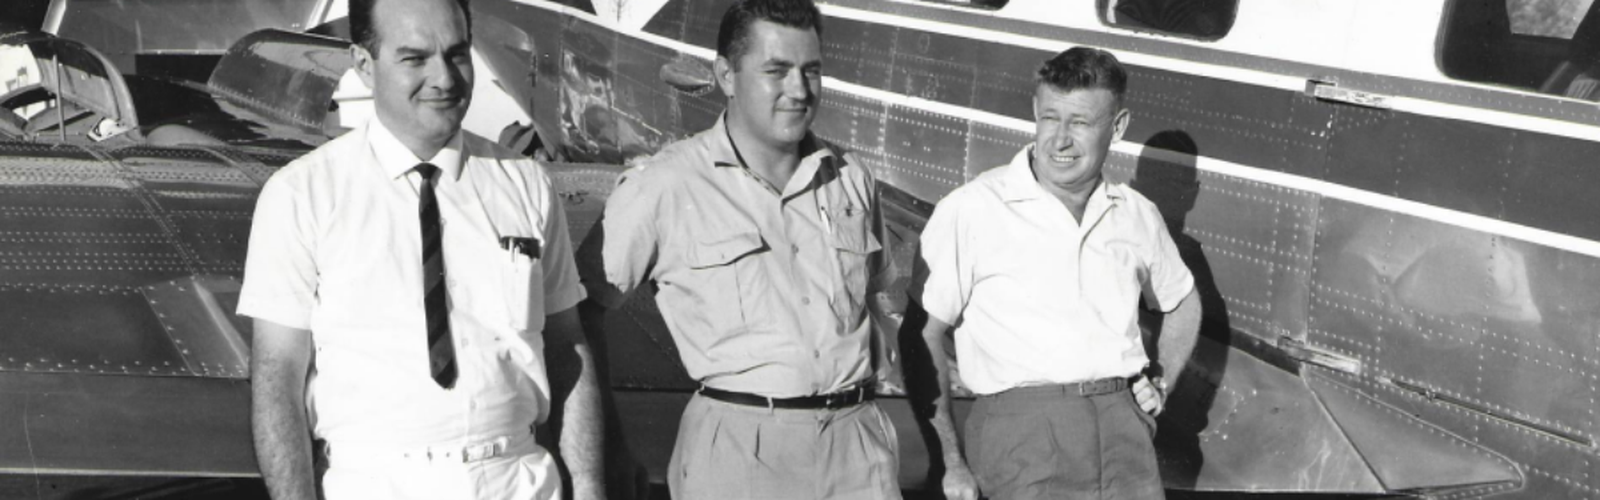 3 men are standing in front of an RFDS aircraft. Liane's father is on the right hand-side leaning against the plane. The image is in black and white.